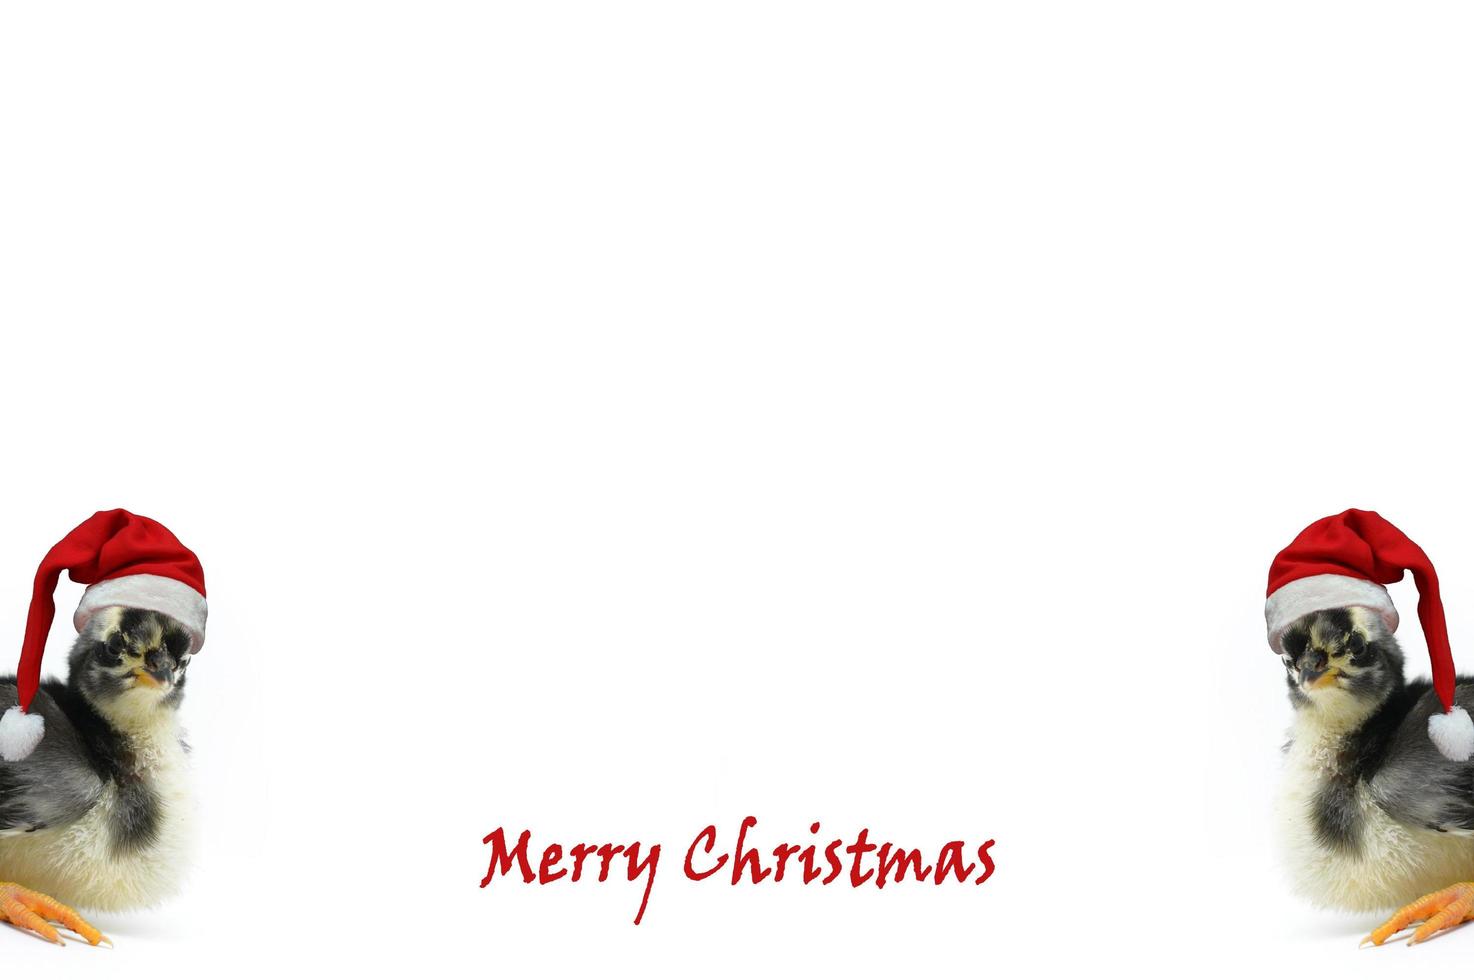 Christmas greeting card with the words Merry Christmas and chicks wearing Santa's red hat on a white background. photo